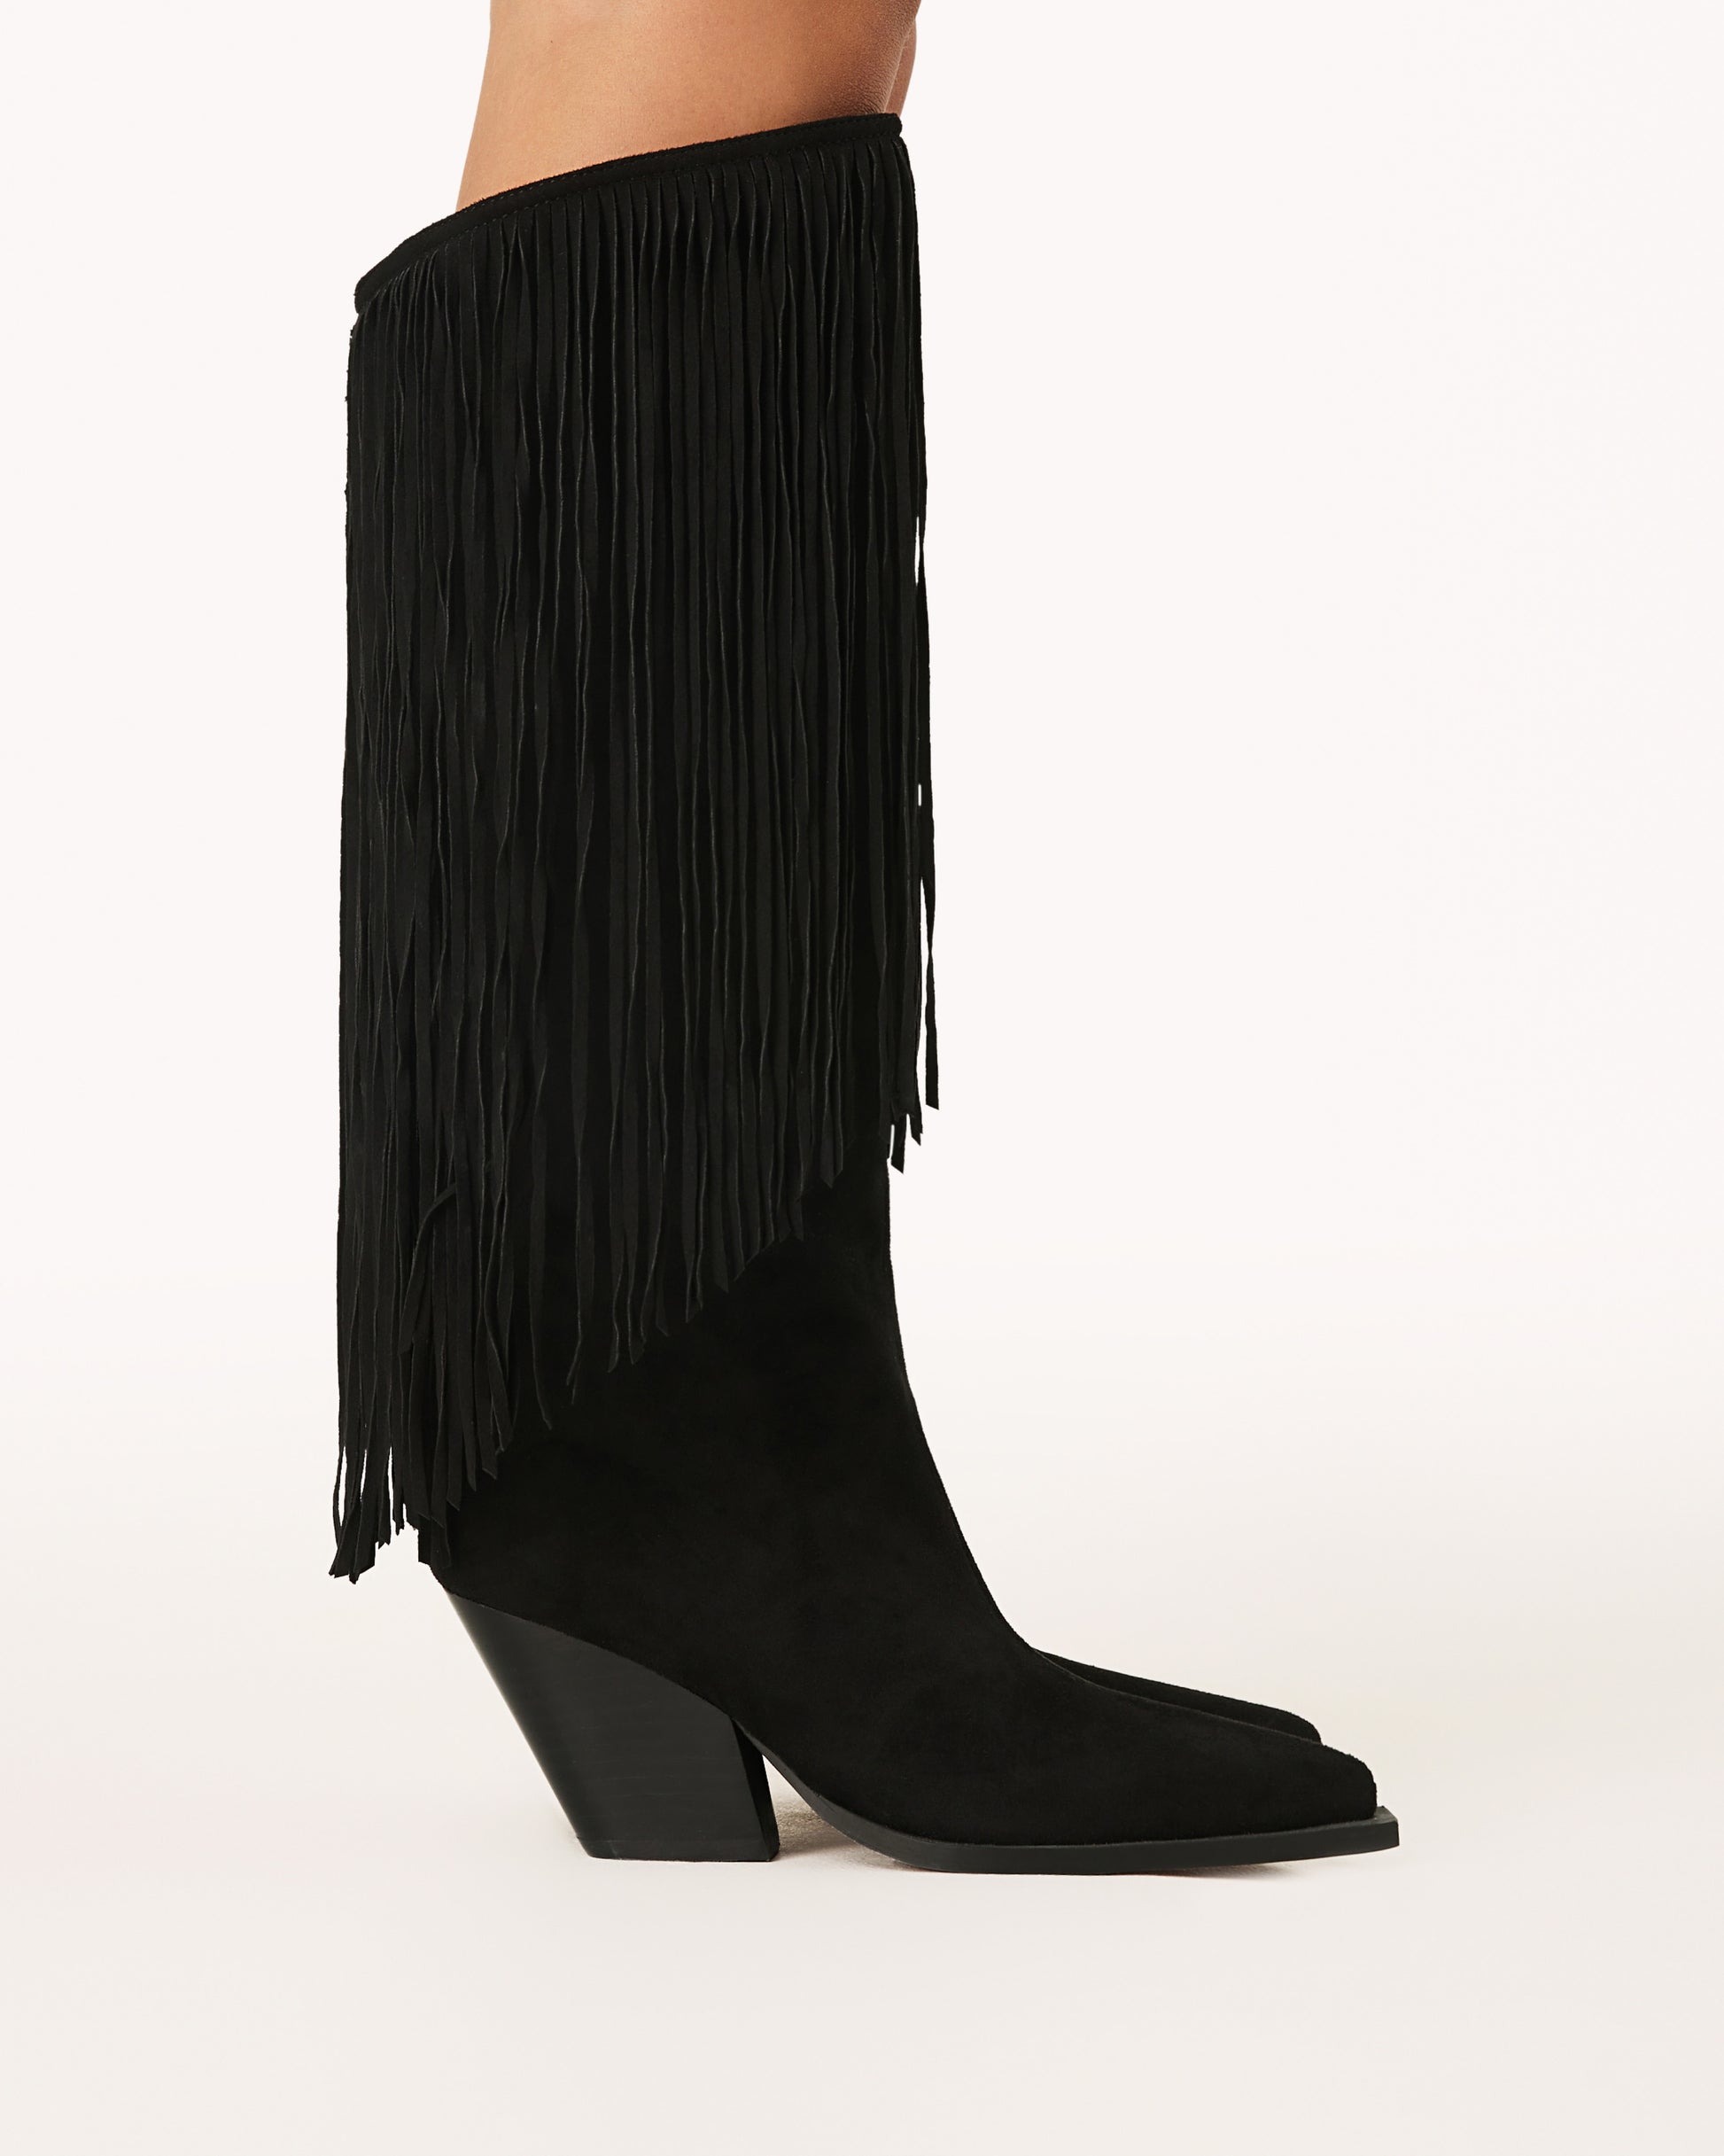 Women's Black Faux Suede Boots With Fringe 